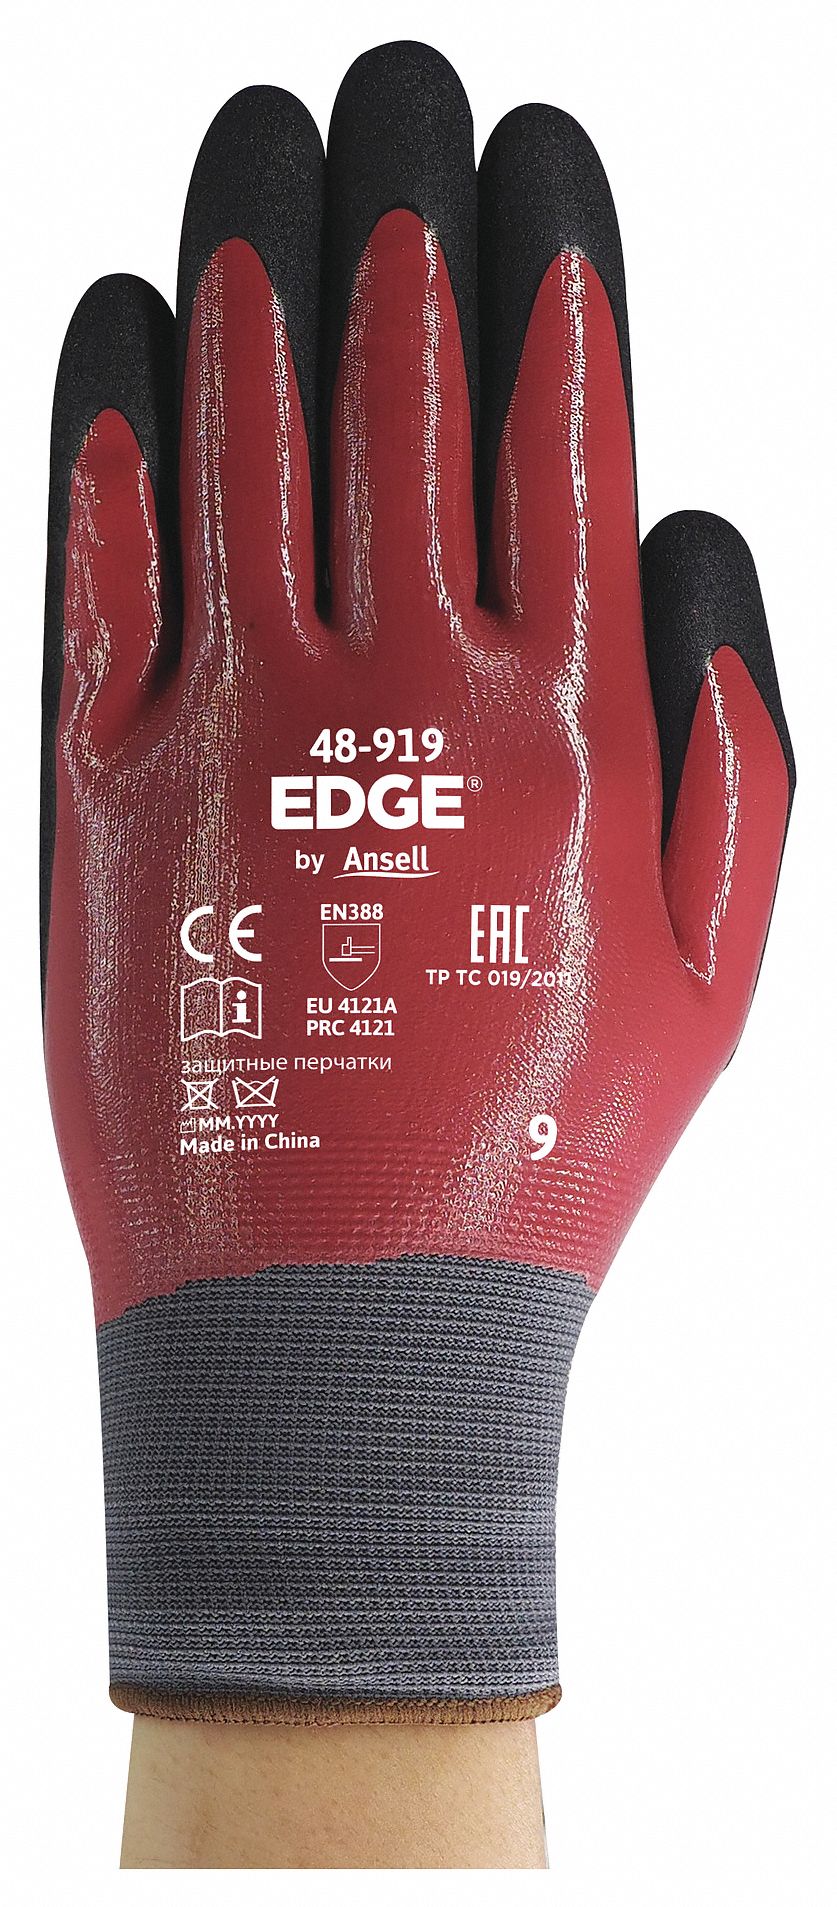 Ansell Edge 48-919 Double Nitrile Coated Work Gloves Oil Water Resistant 